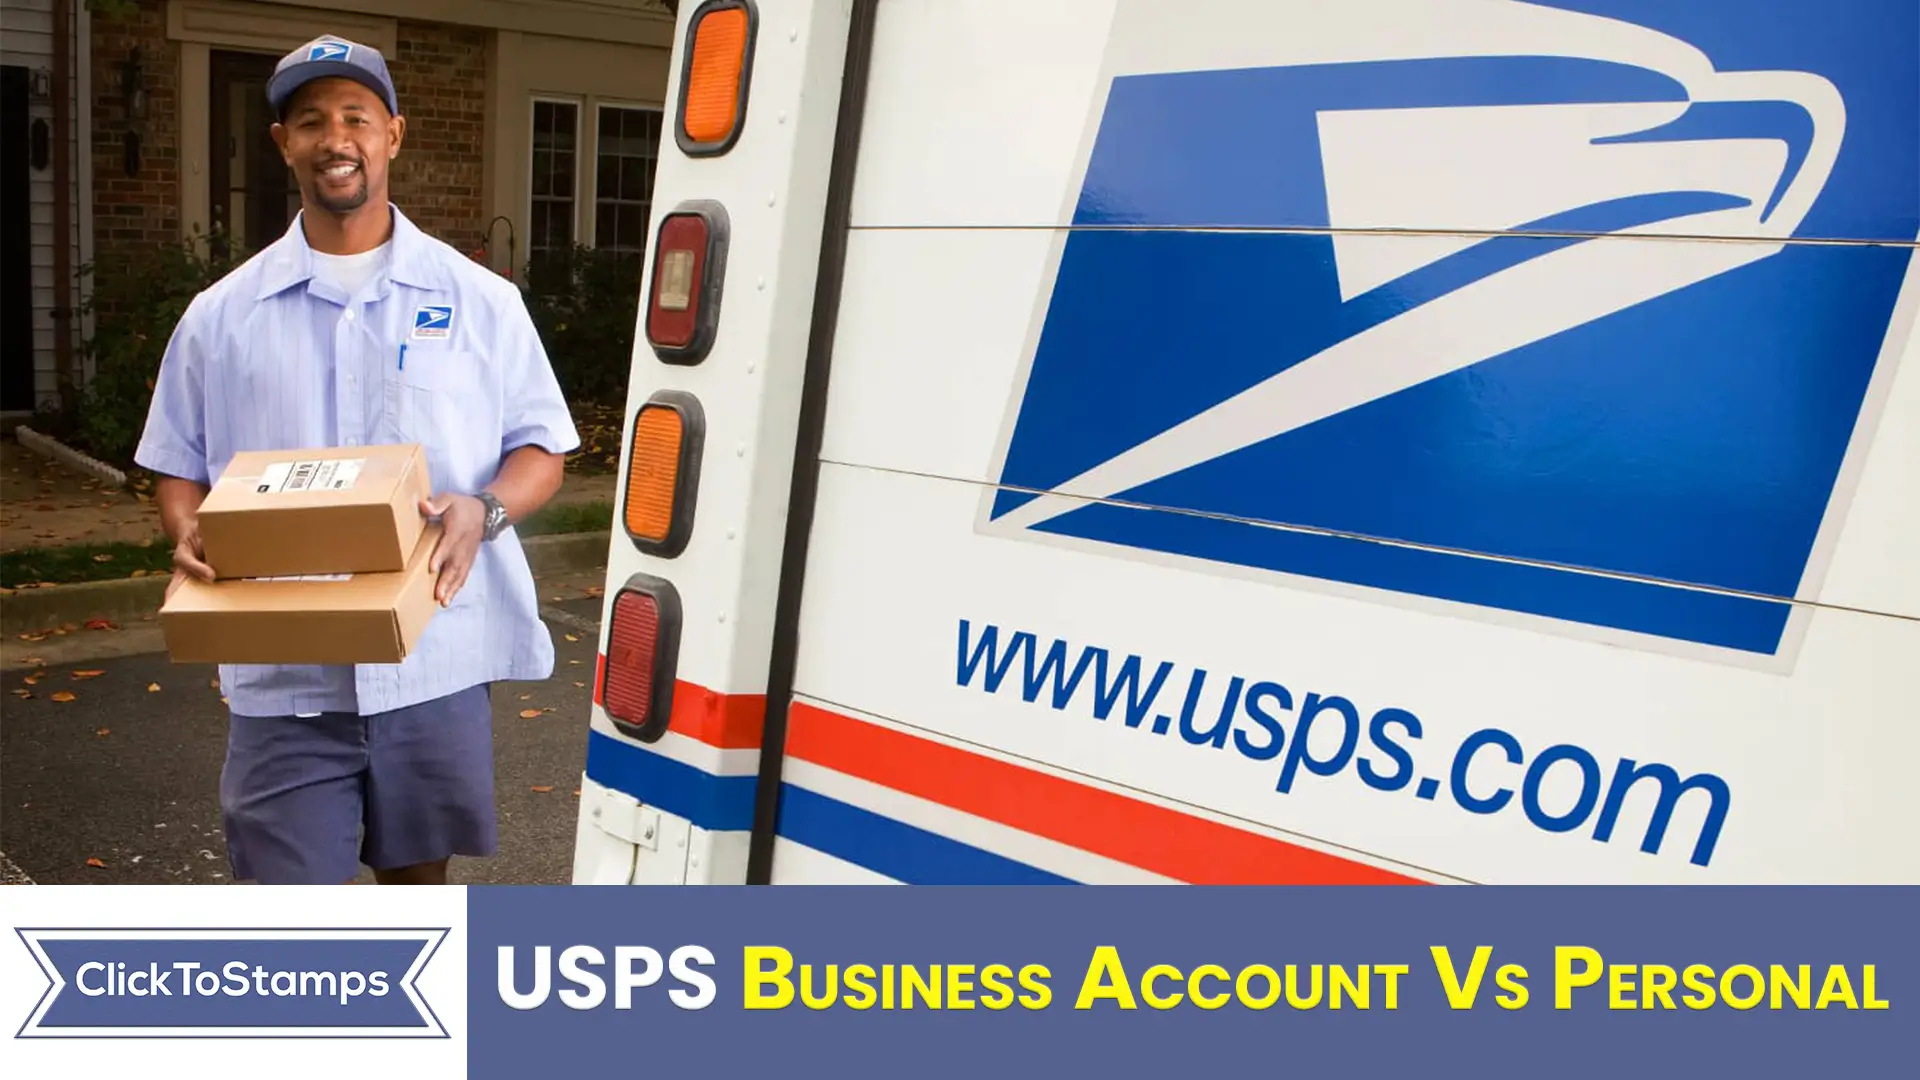 USPS Business Account Vs Personal